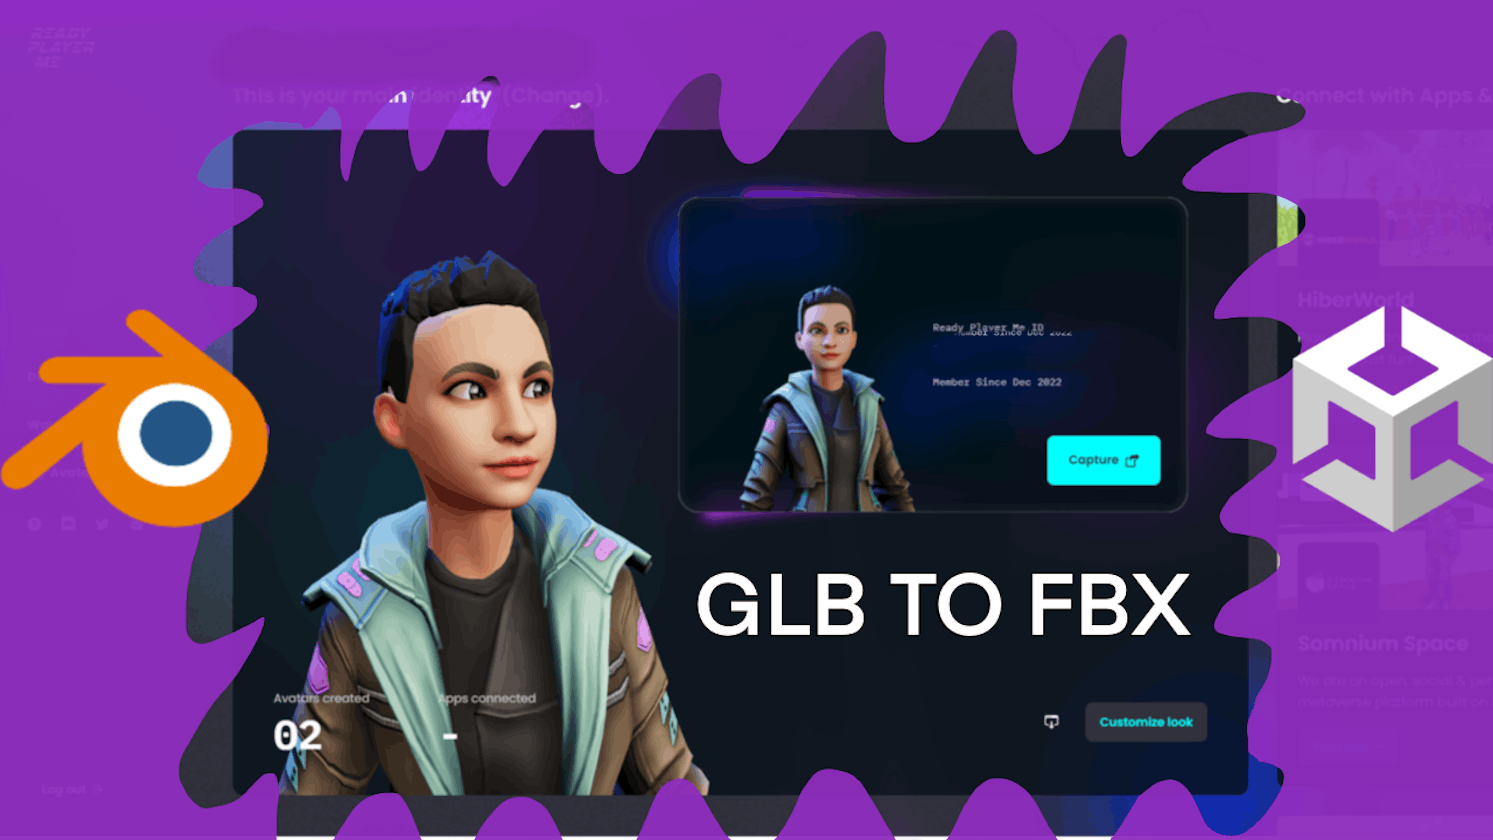 Made With Unity | Using Blender to Convert Ready Player Me Avatars to FBX